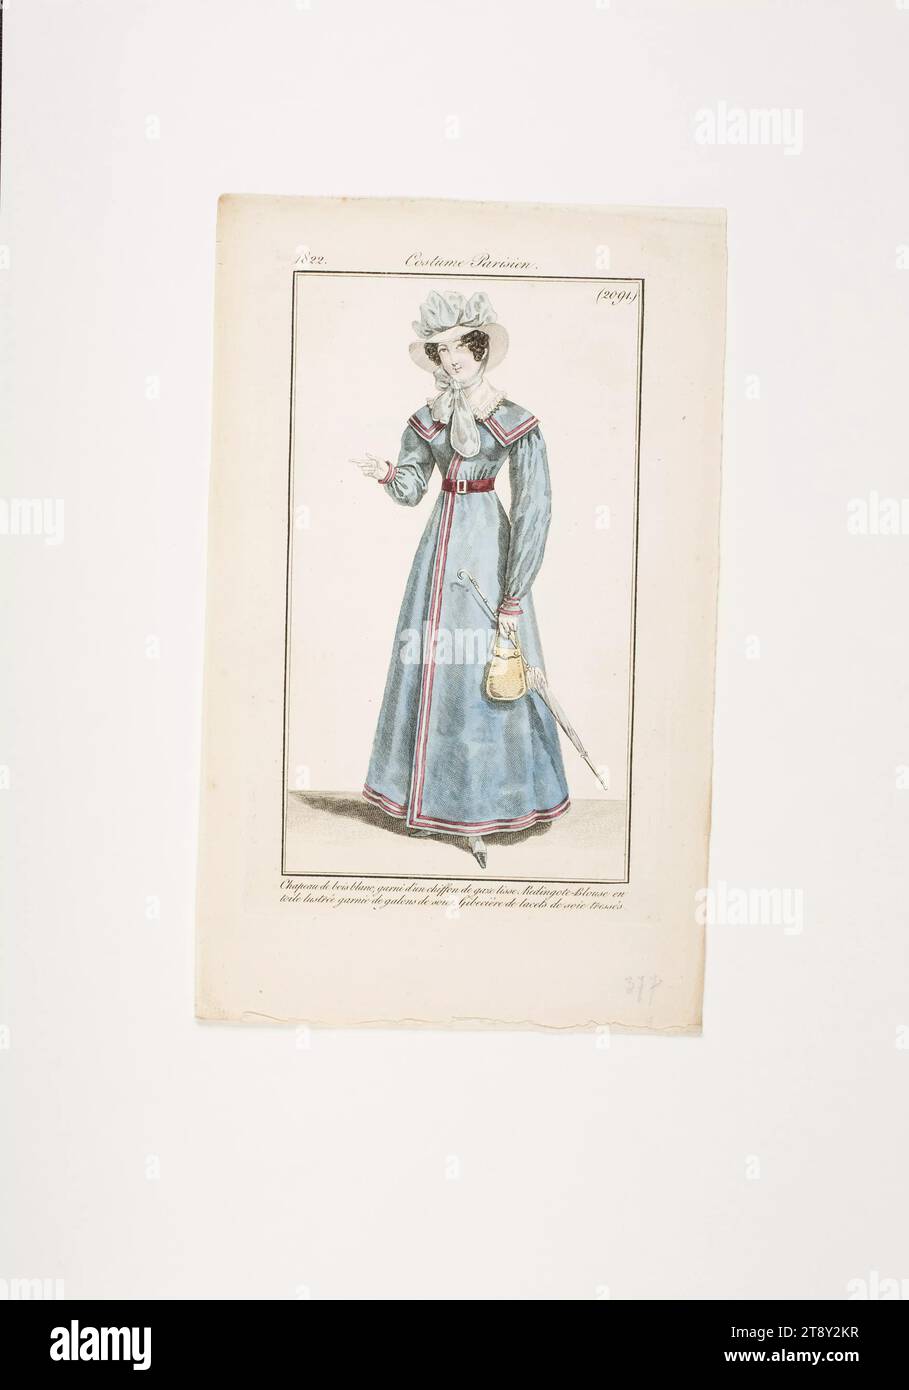 Fashion plate: 'Parisian woman with hat, coat dress, bag, umbrella and belt', Unknown, 1822, paper, colorised, copperplate engraving, height 21, 5 cm, width 13 cm, plate size 15, 5×9 cm, Fashion, Bourgeoisie, Biedermeier, fashion plates, head-gear, coat, woman, dress, gown, The Vienna Collection Stock Photo